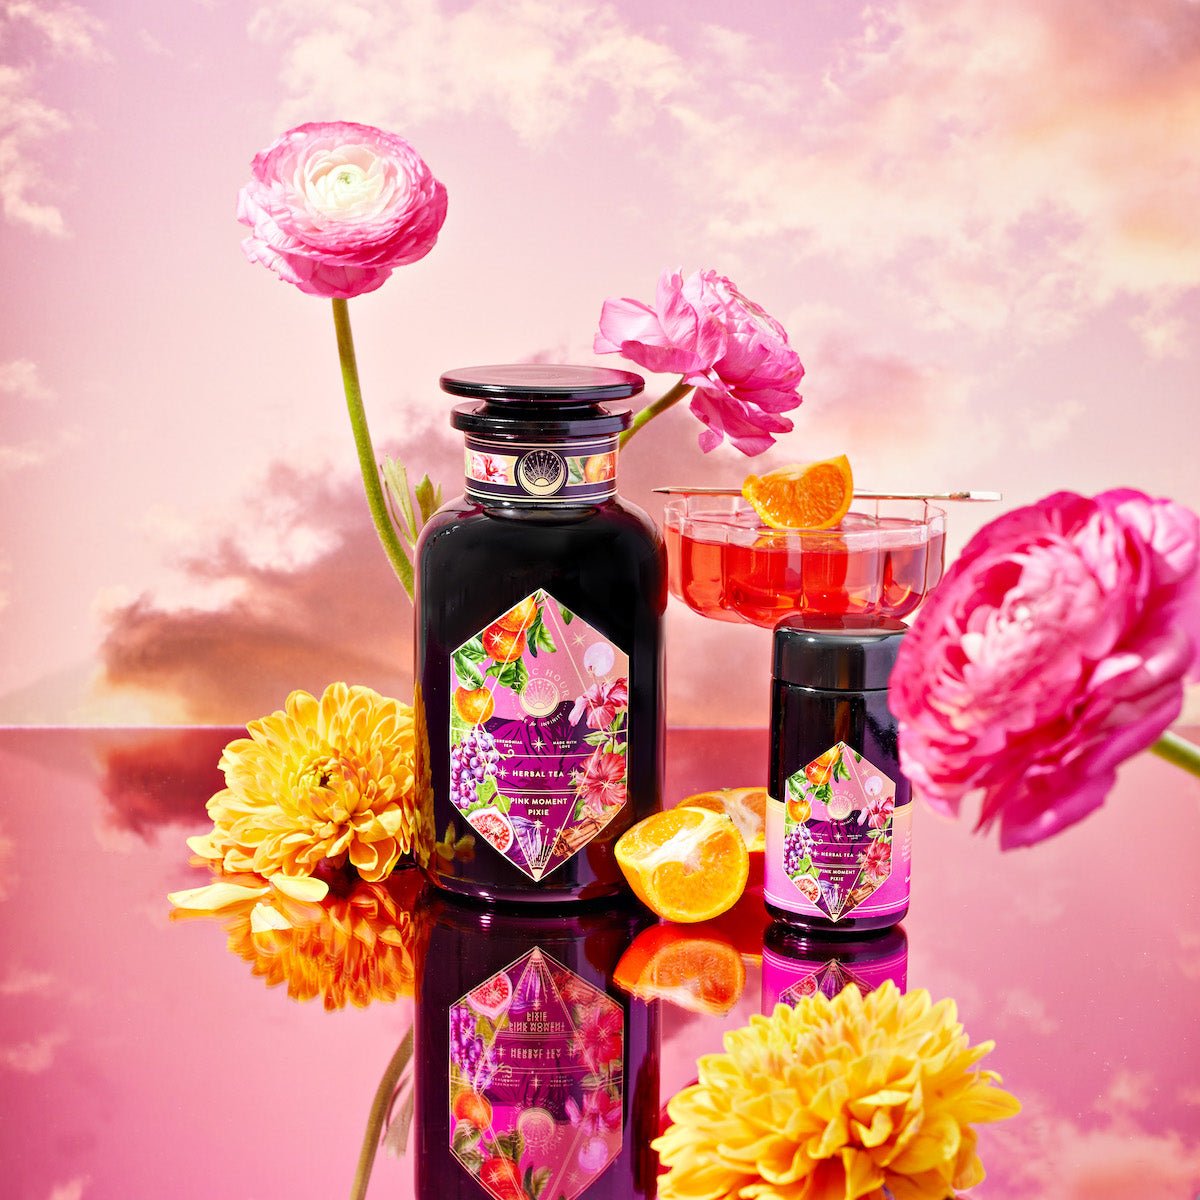 Pink Moment Pixie - Hibiscus Tangerine Dream Herbal Tea-Violet Glass Apothecary Jar (up to 65 cups!)-Magic Hour